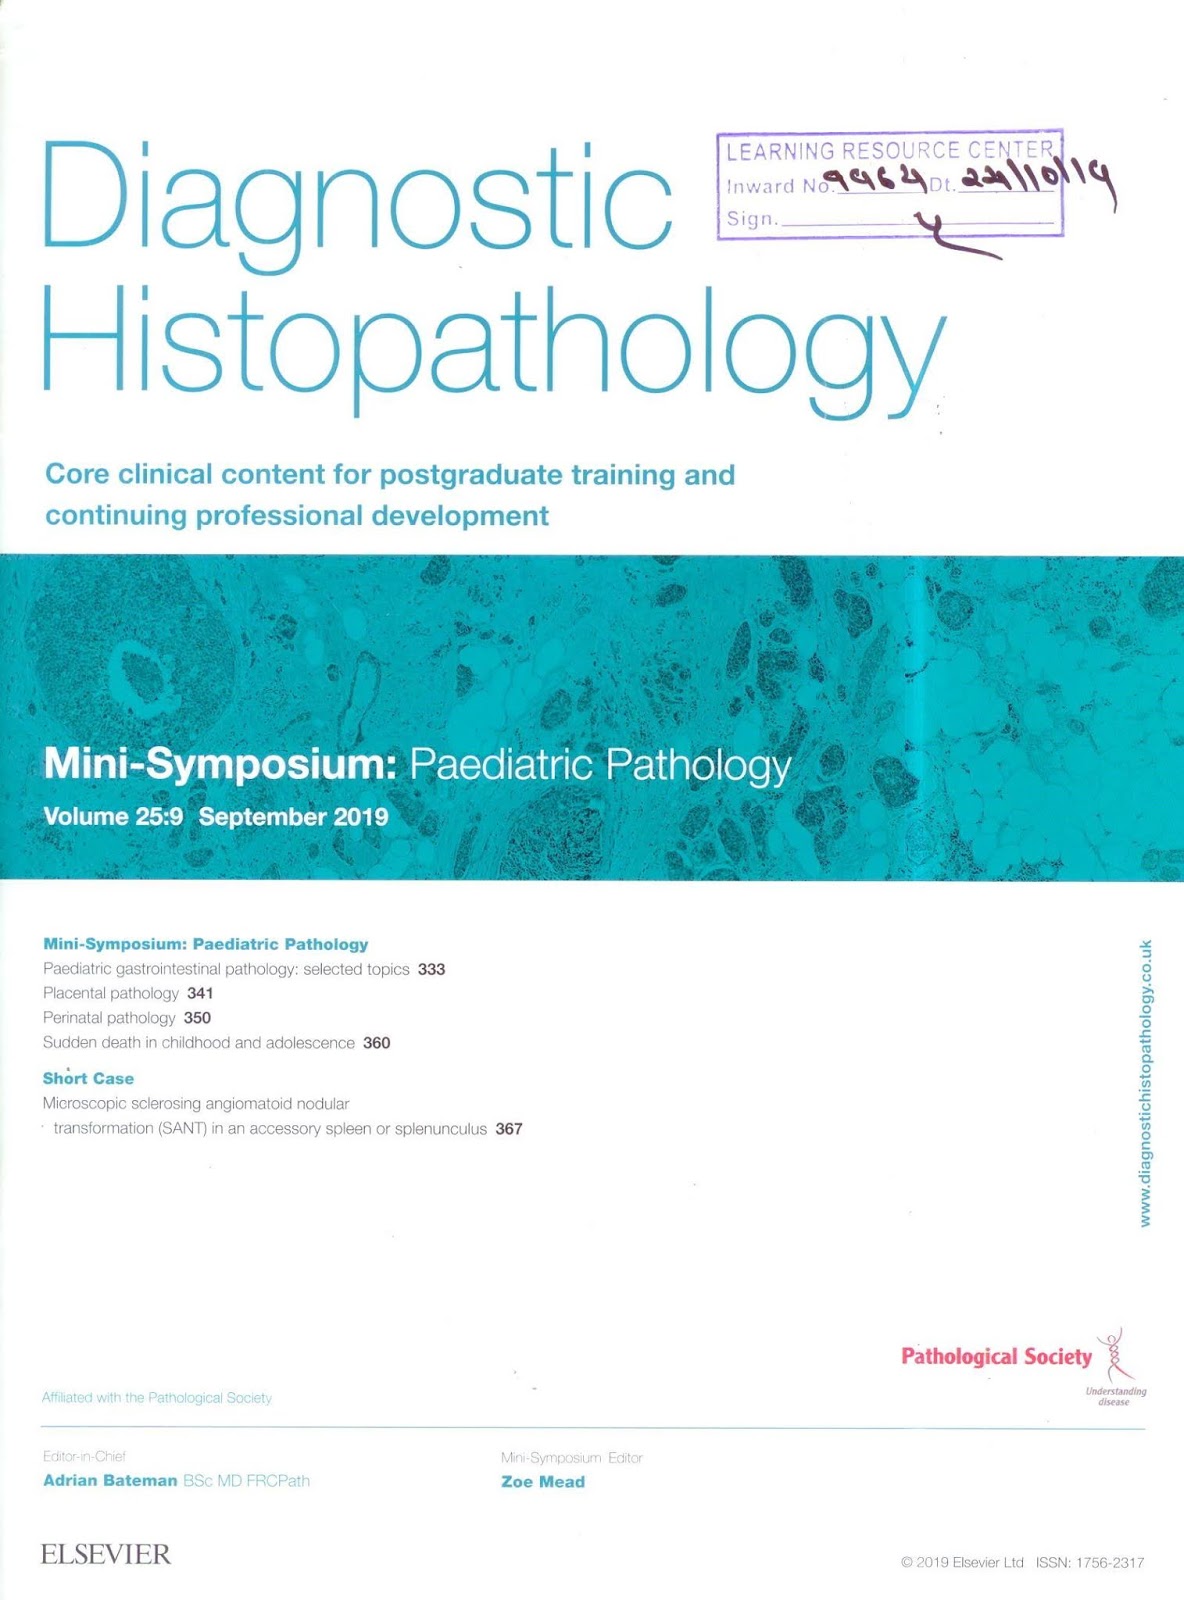 https://www.sciencedirect.com/journal/diagnostic-histopathology/vol/25/issue/9